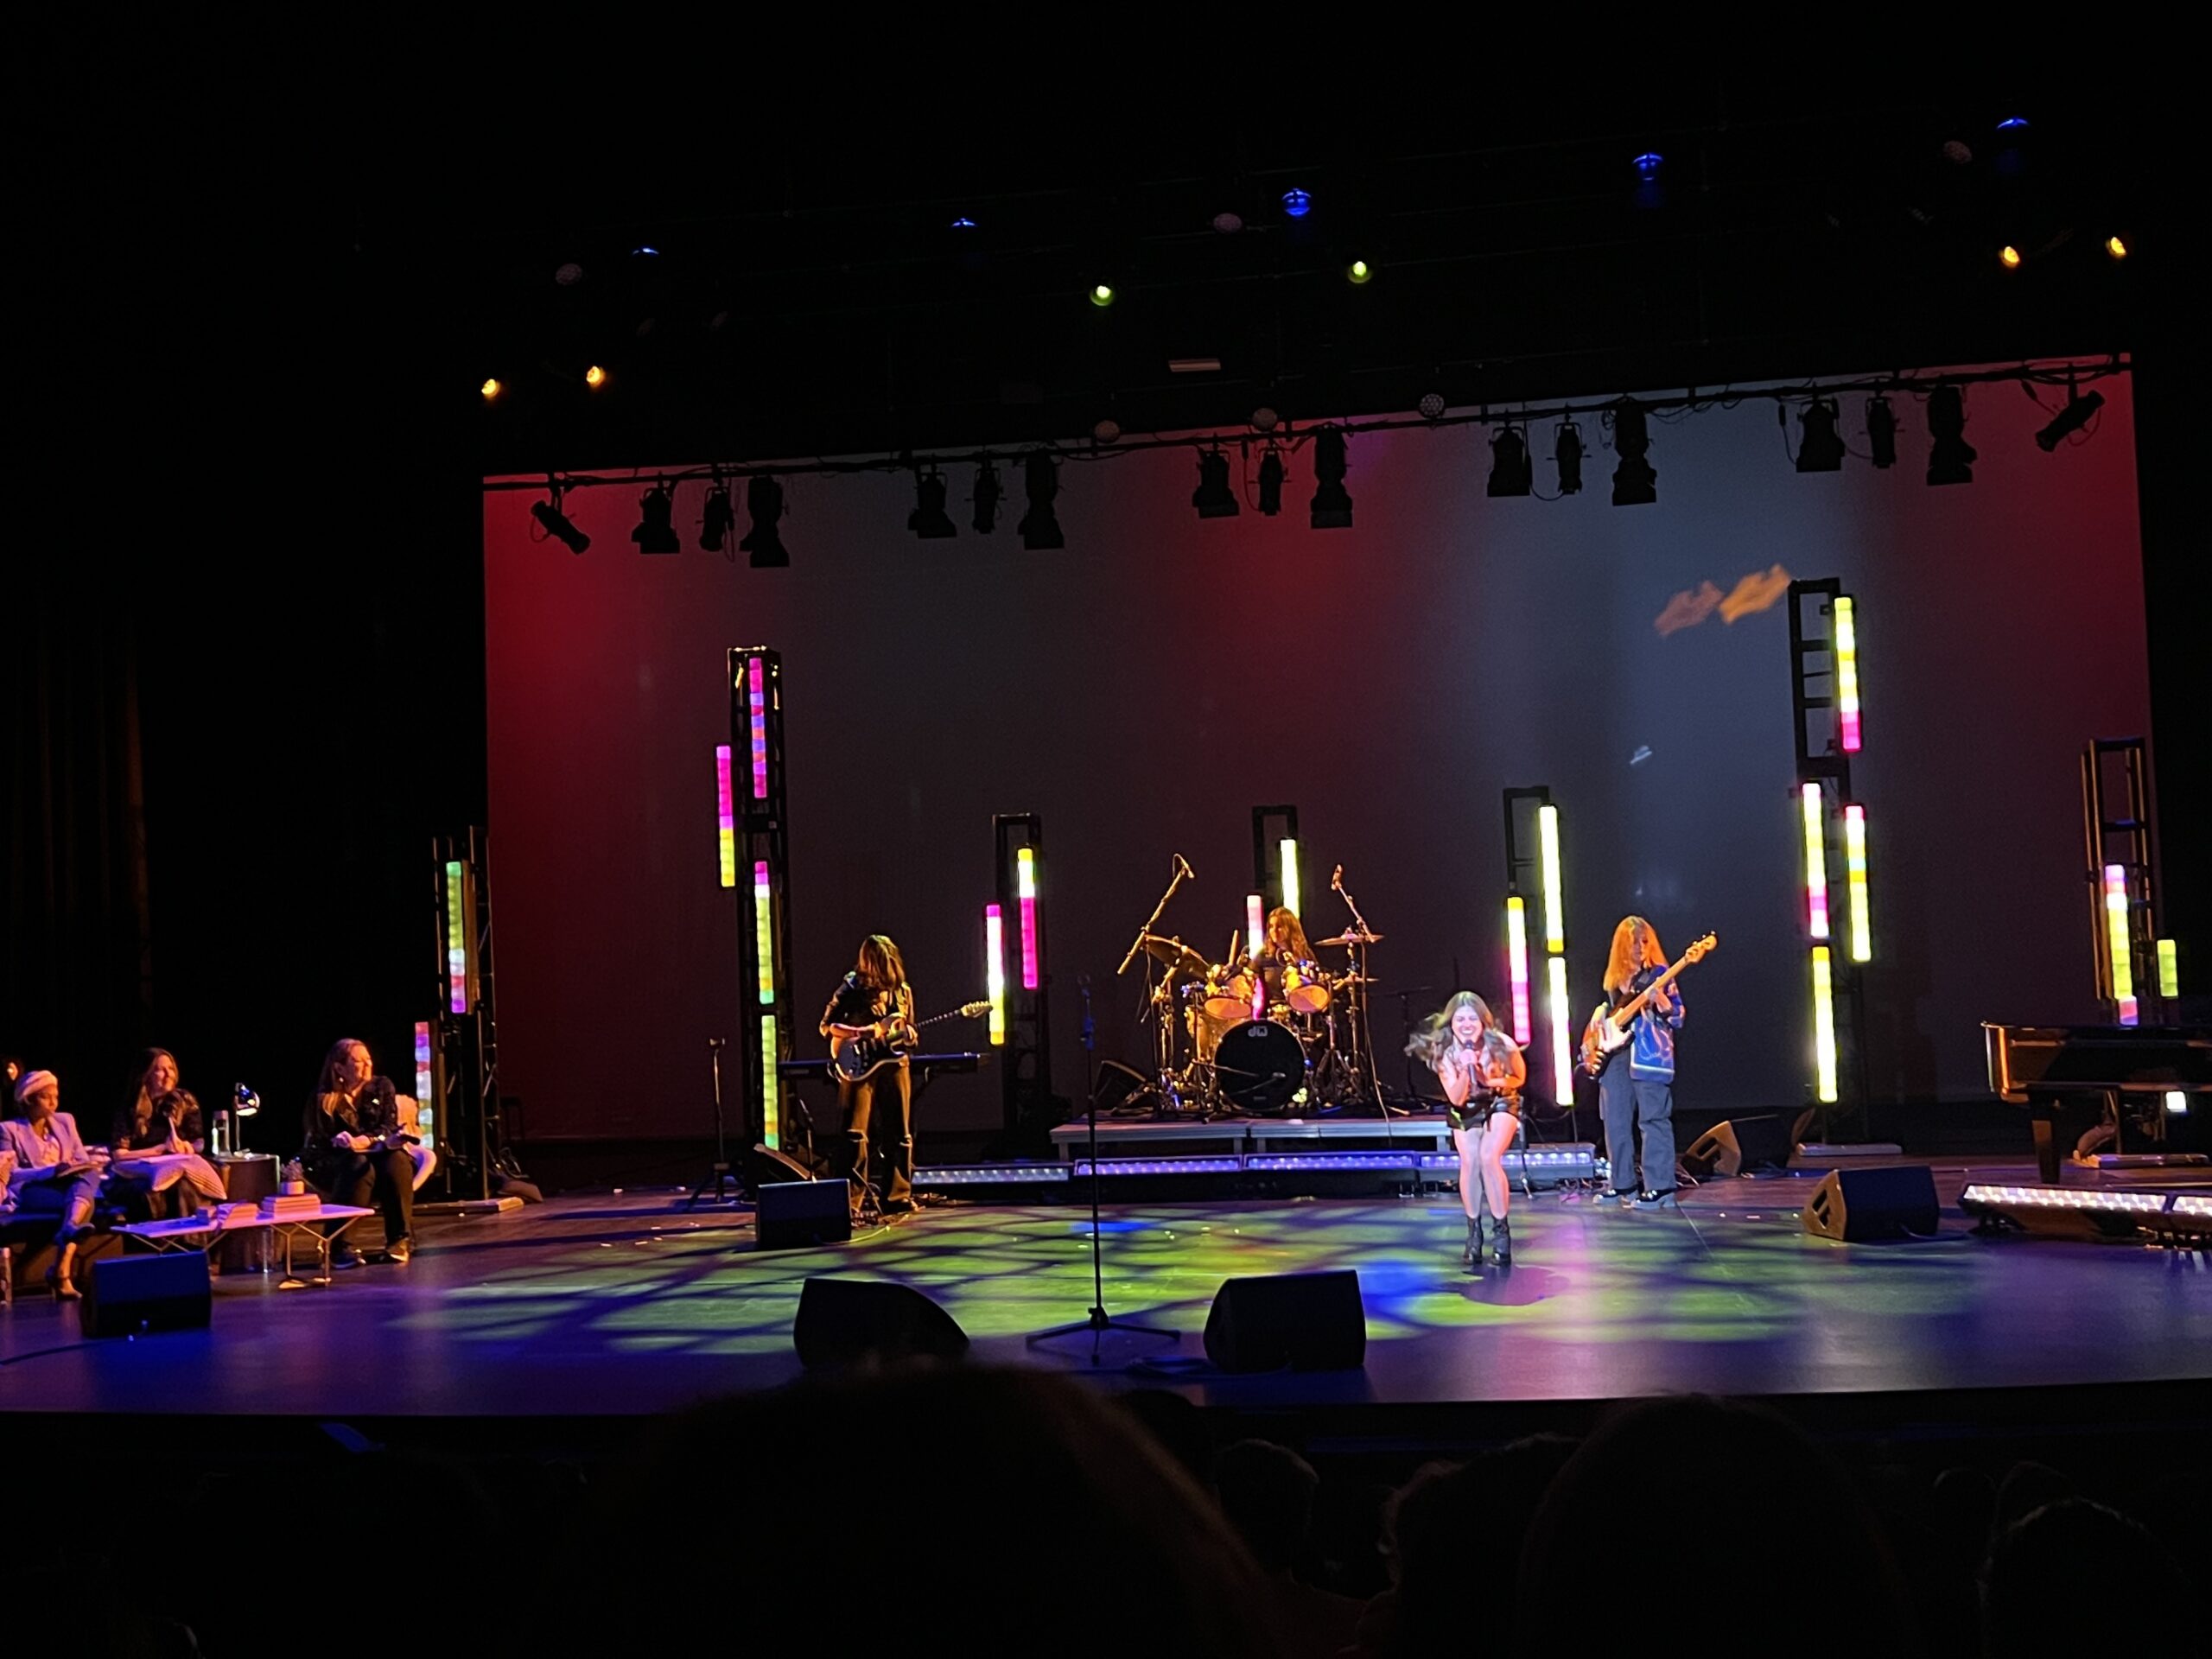 A student band performs onstage at “UVL.”